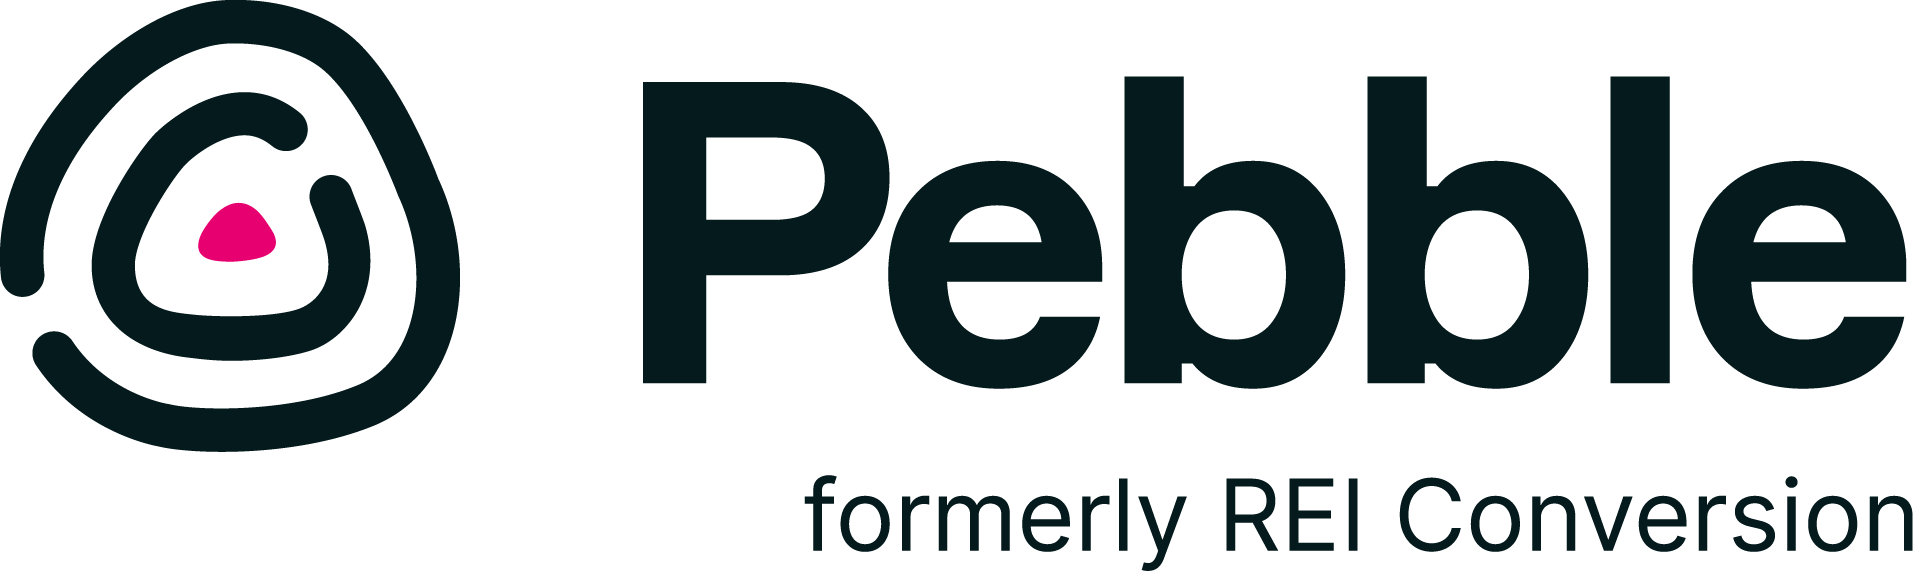 About 1 — Pebble